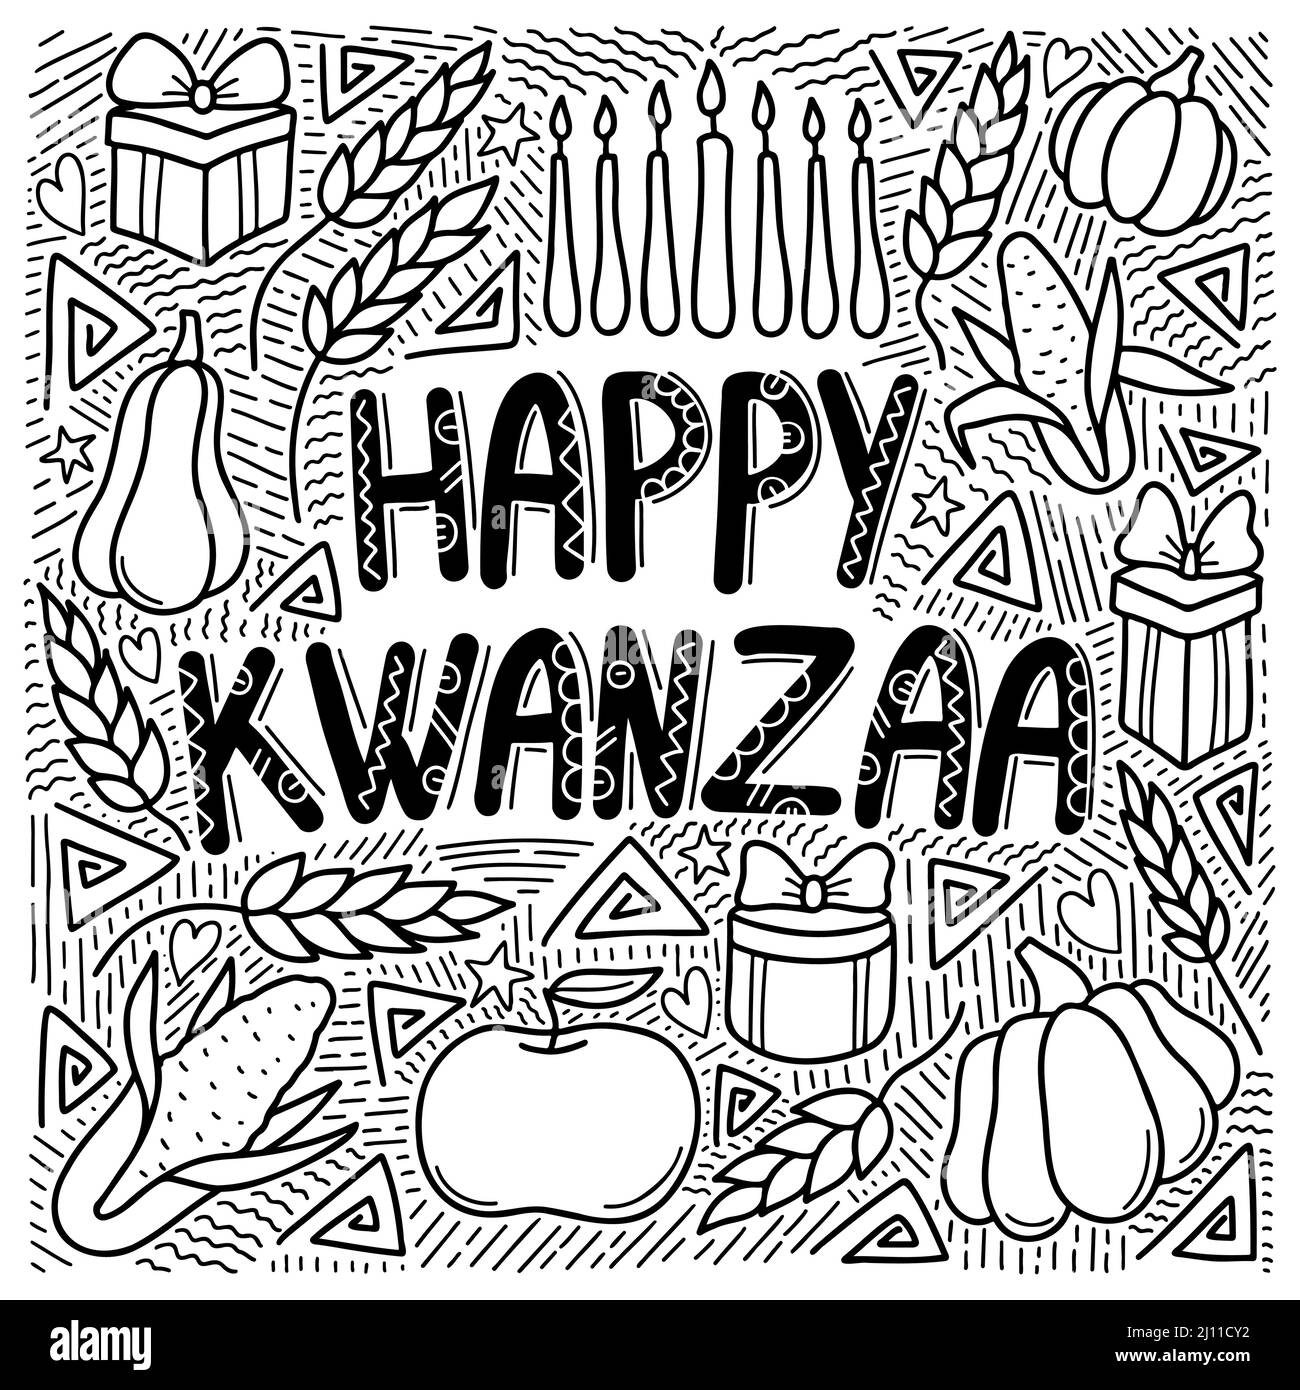 Happy Kwanzaa hand drawn banner in doodle style Stock Vector